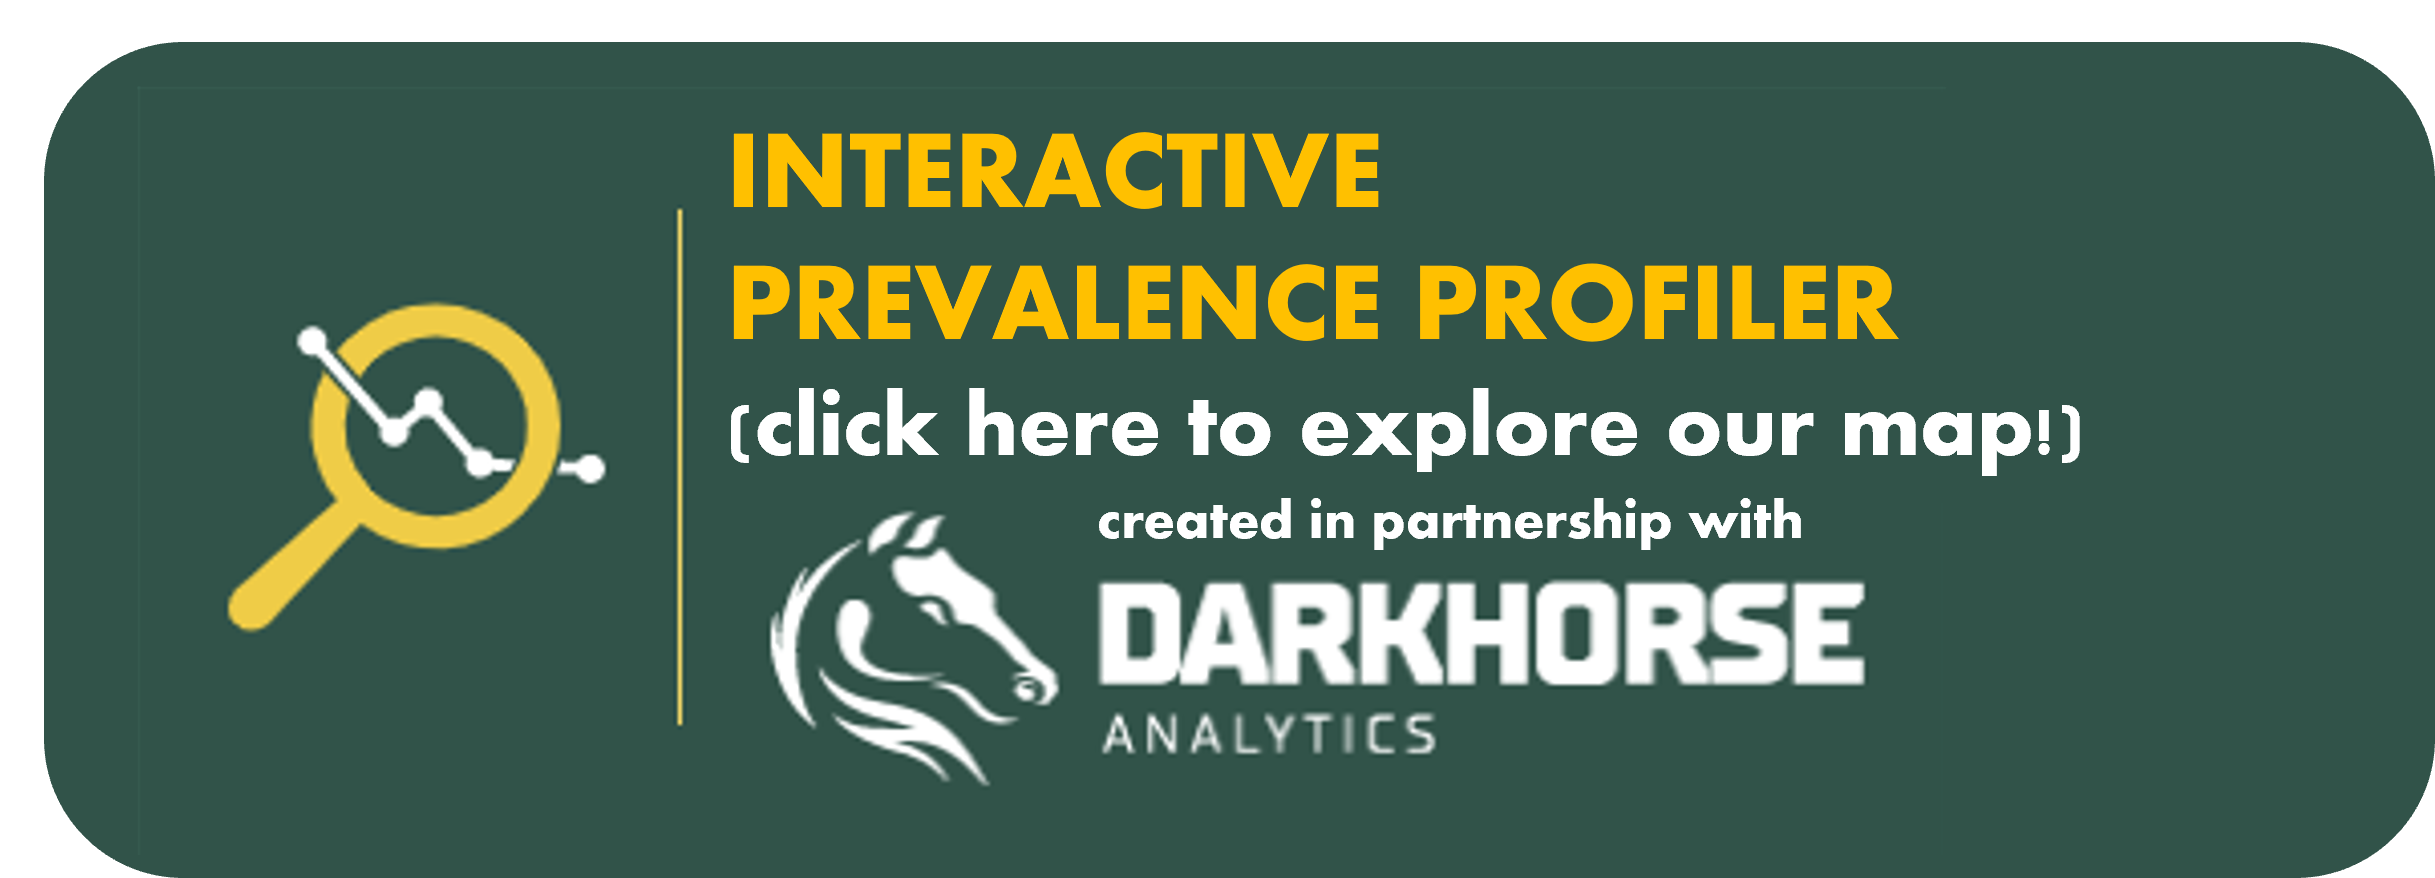 Interactive Prevalence Profiler (Click here to explore our map!) - Created in partnership with Darkhorse Analytics